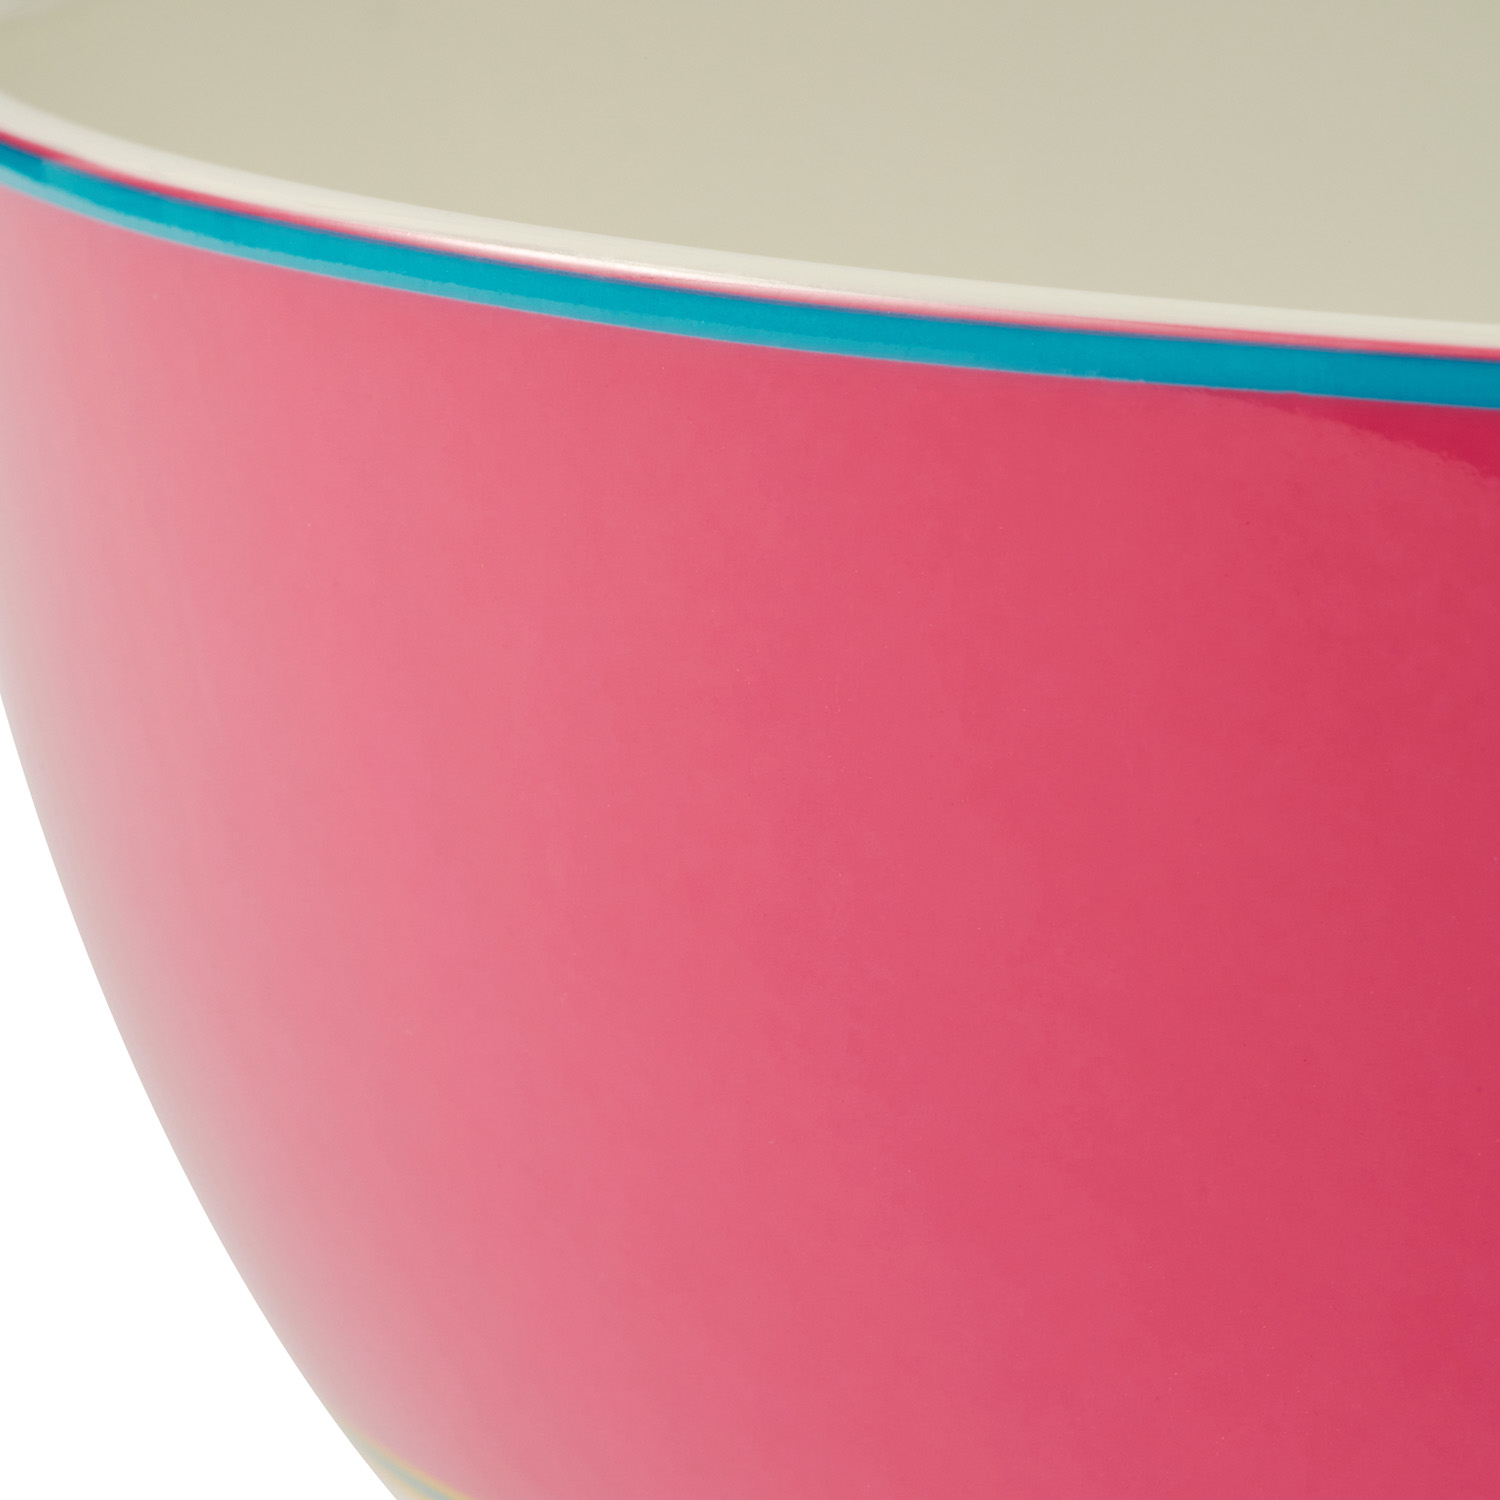 Calypso Pink Serving Bowl image number null